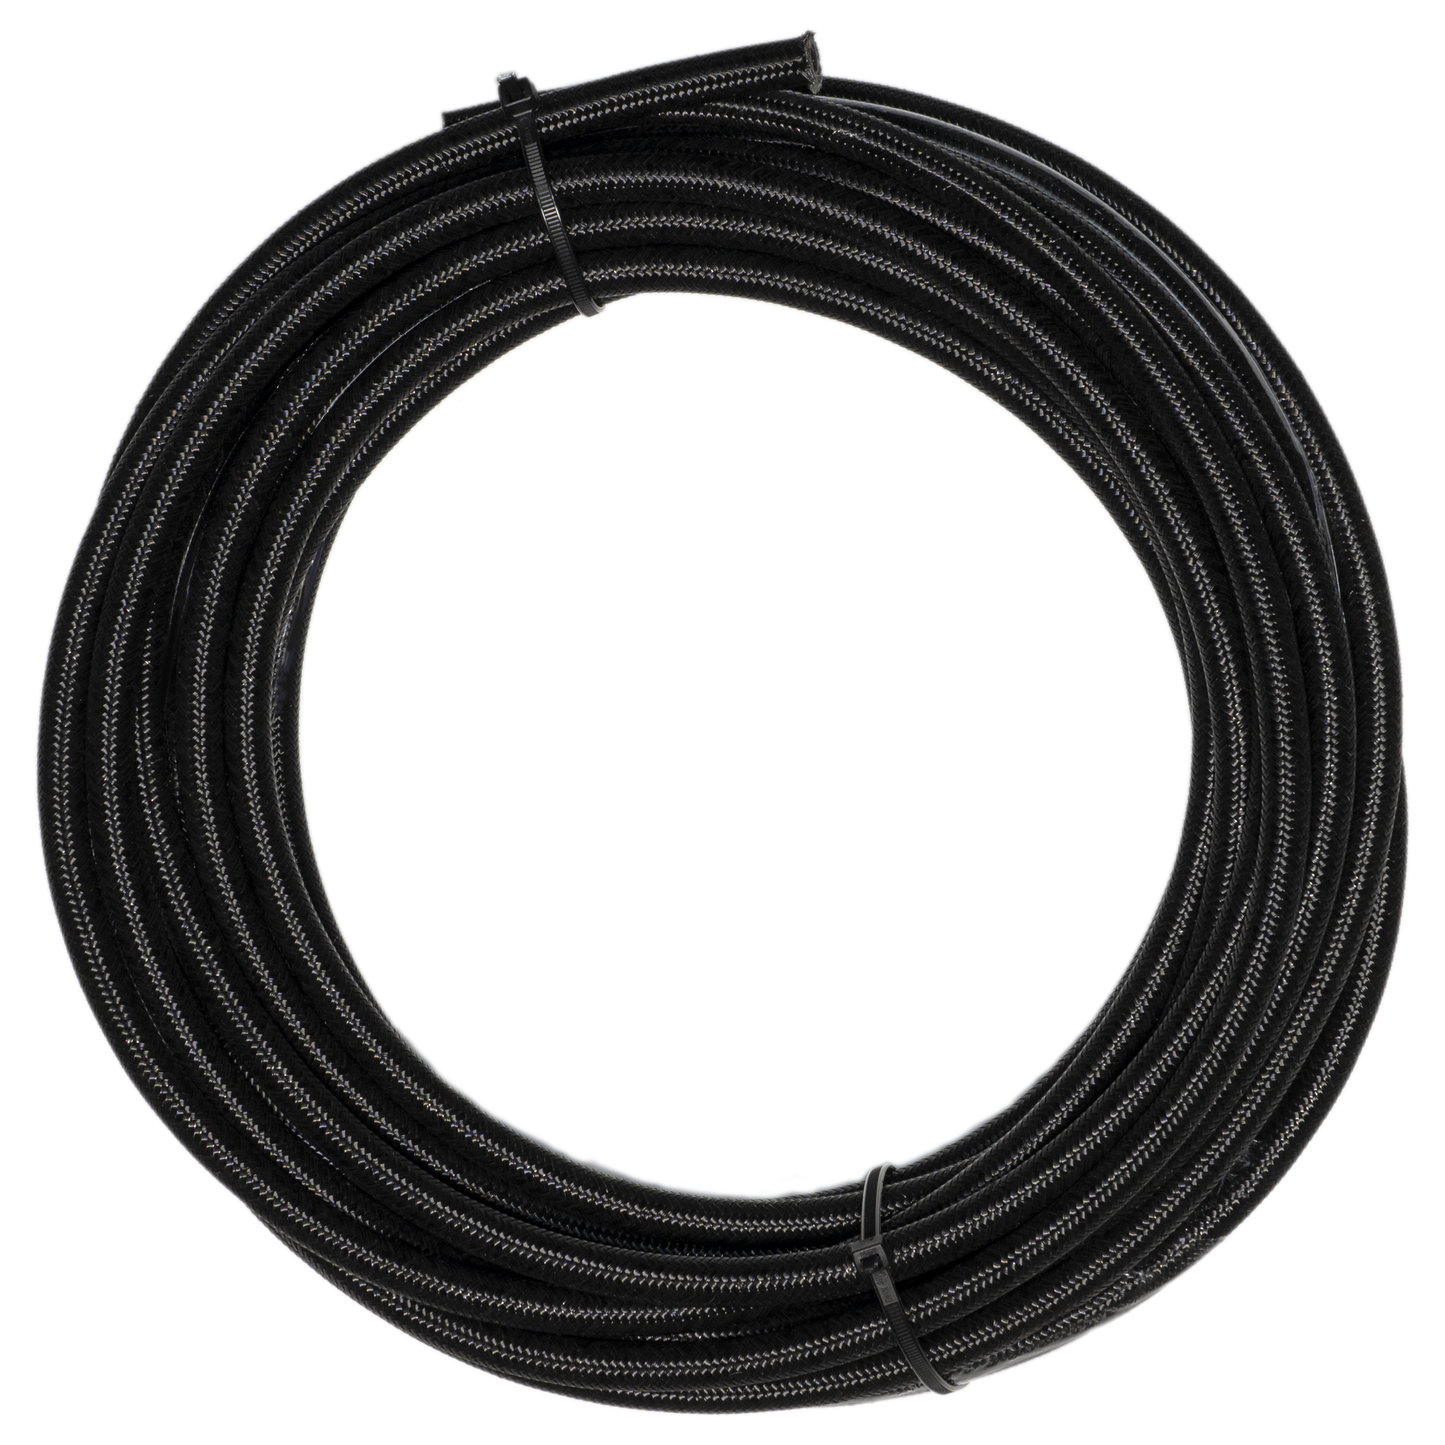 Black Stainless Steel Braided Hose - Synthetic Rubber Liner - Per Foot